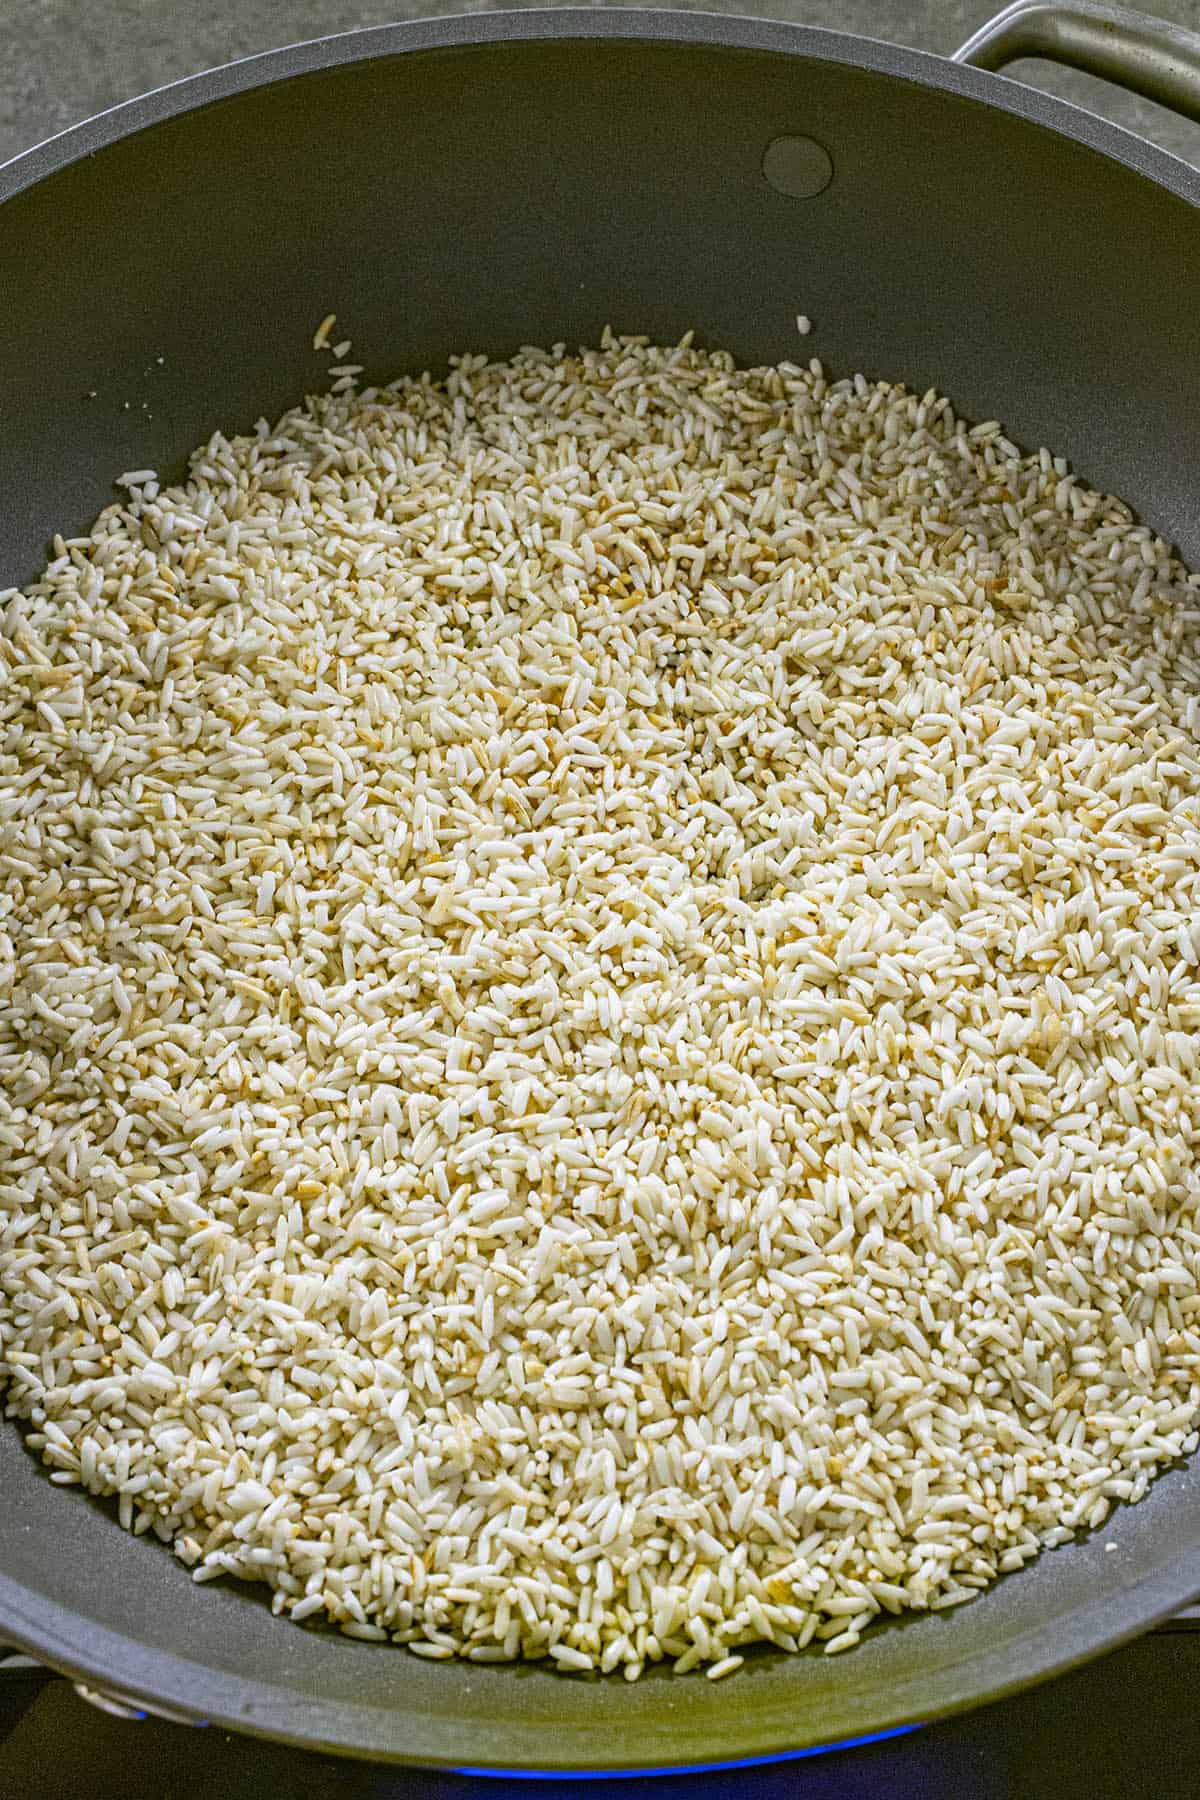 Browning the rice in a pan to make Mexican rice